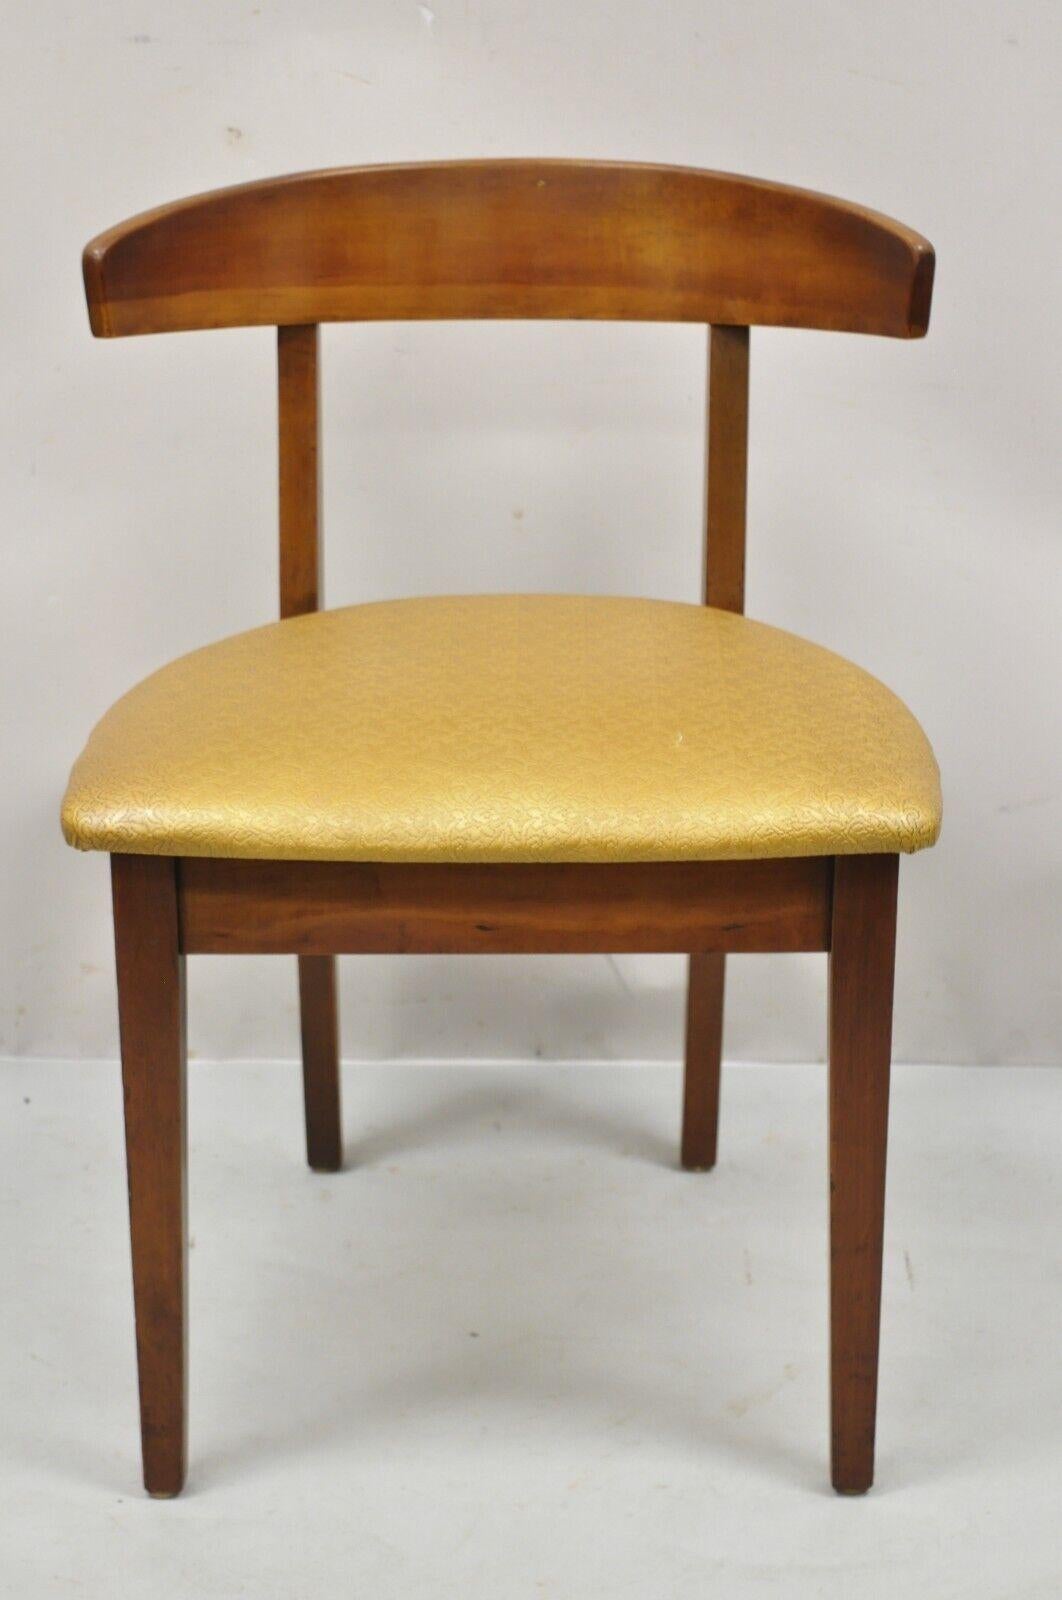 Mid-Century Modern cherry wood curved back hoof leg side chair. Item features curved back, beautiful wood grain, tapered legs, very nice vintage item, great style and form. Circa mid-20th century. Measurements: 29.25